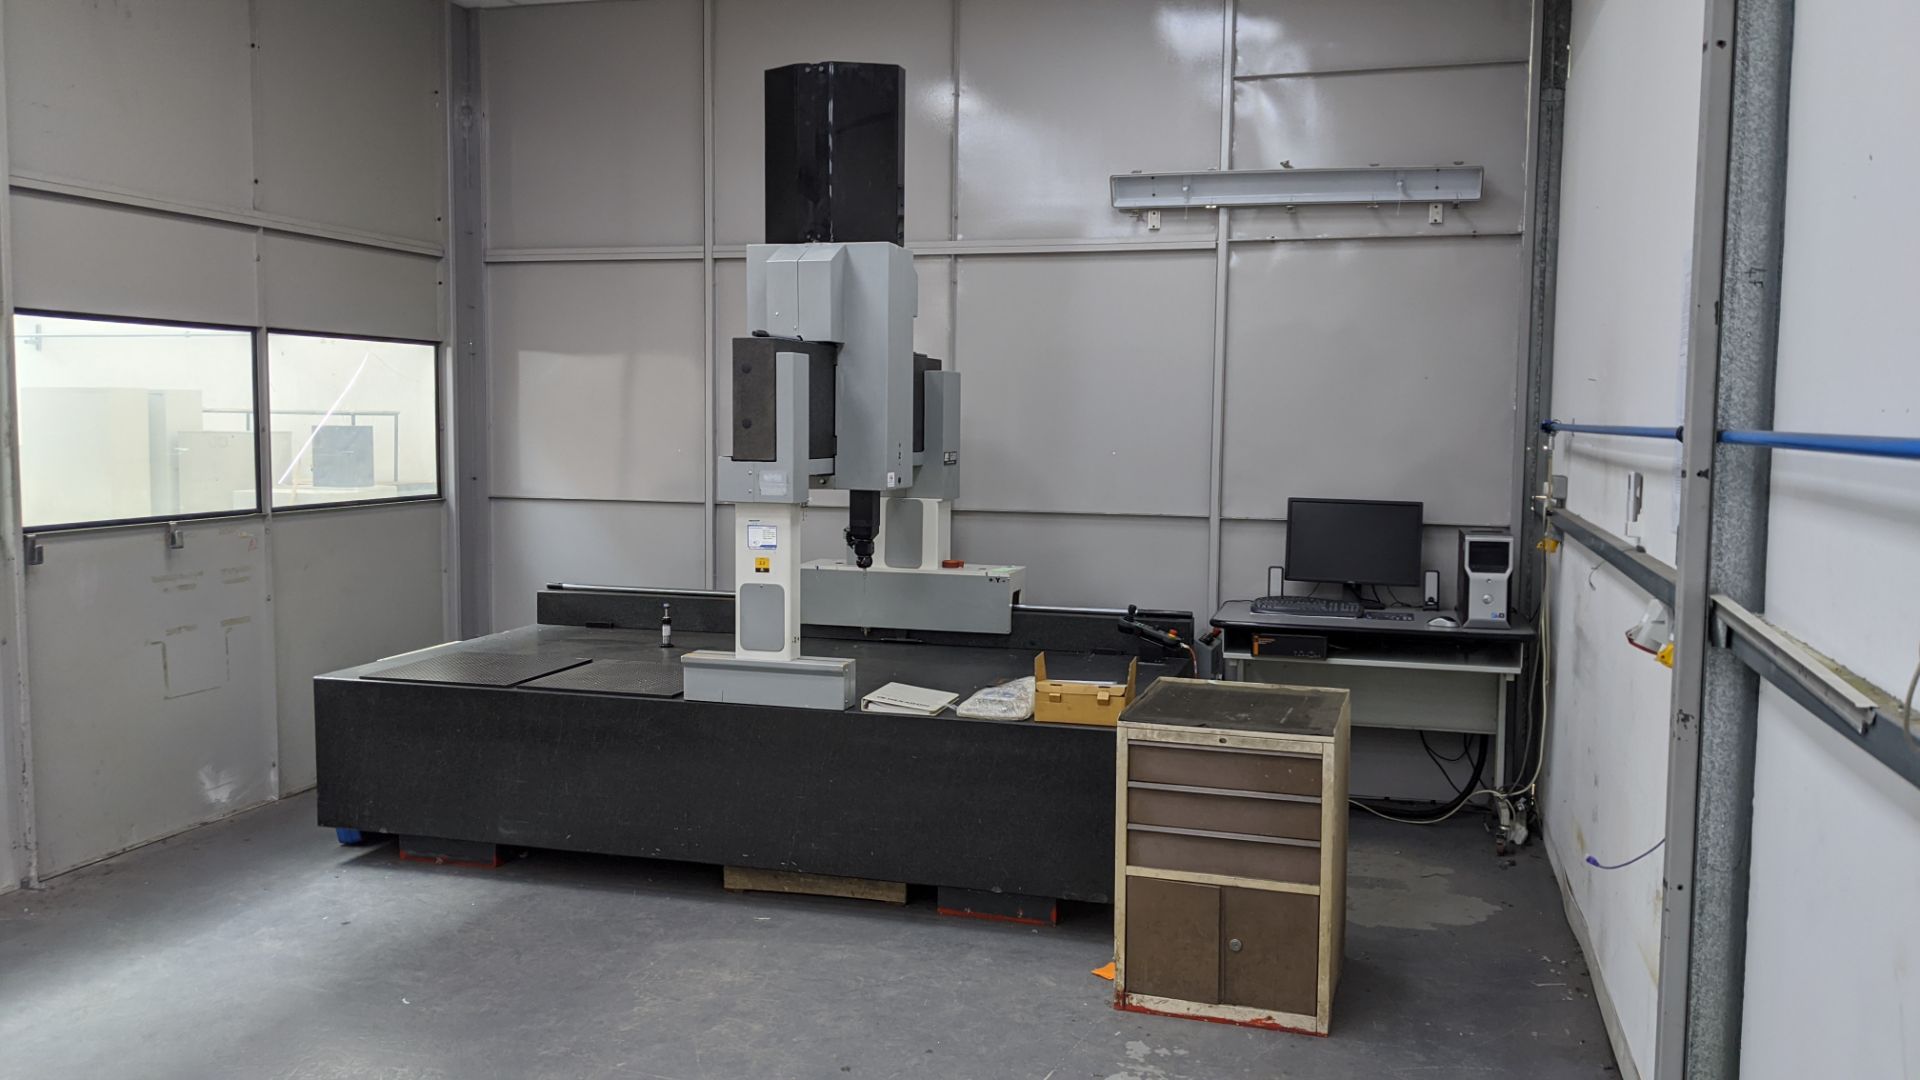 LK Microvector CMM model G80 with Renishaw model PH10T probe on granite table measuring approx. - Image 23 of 28